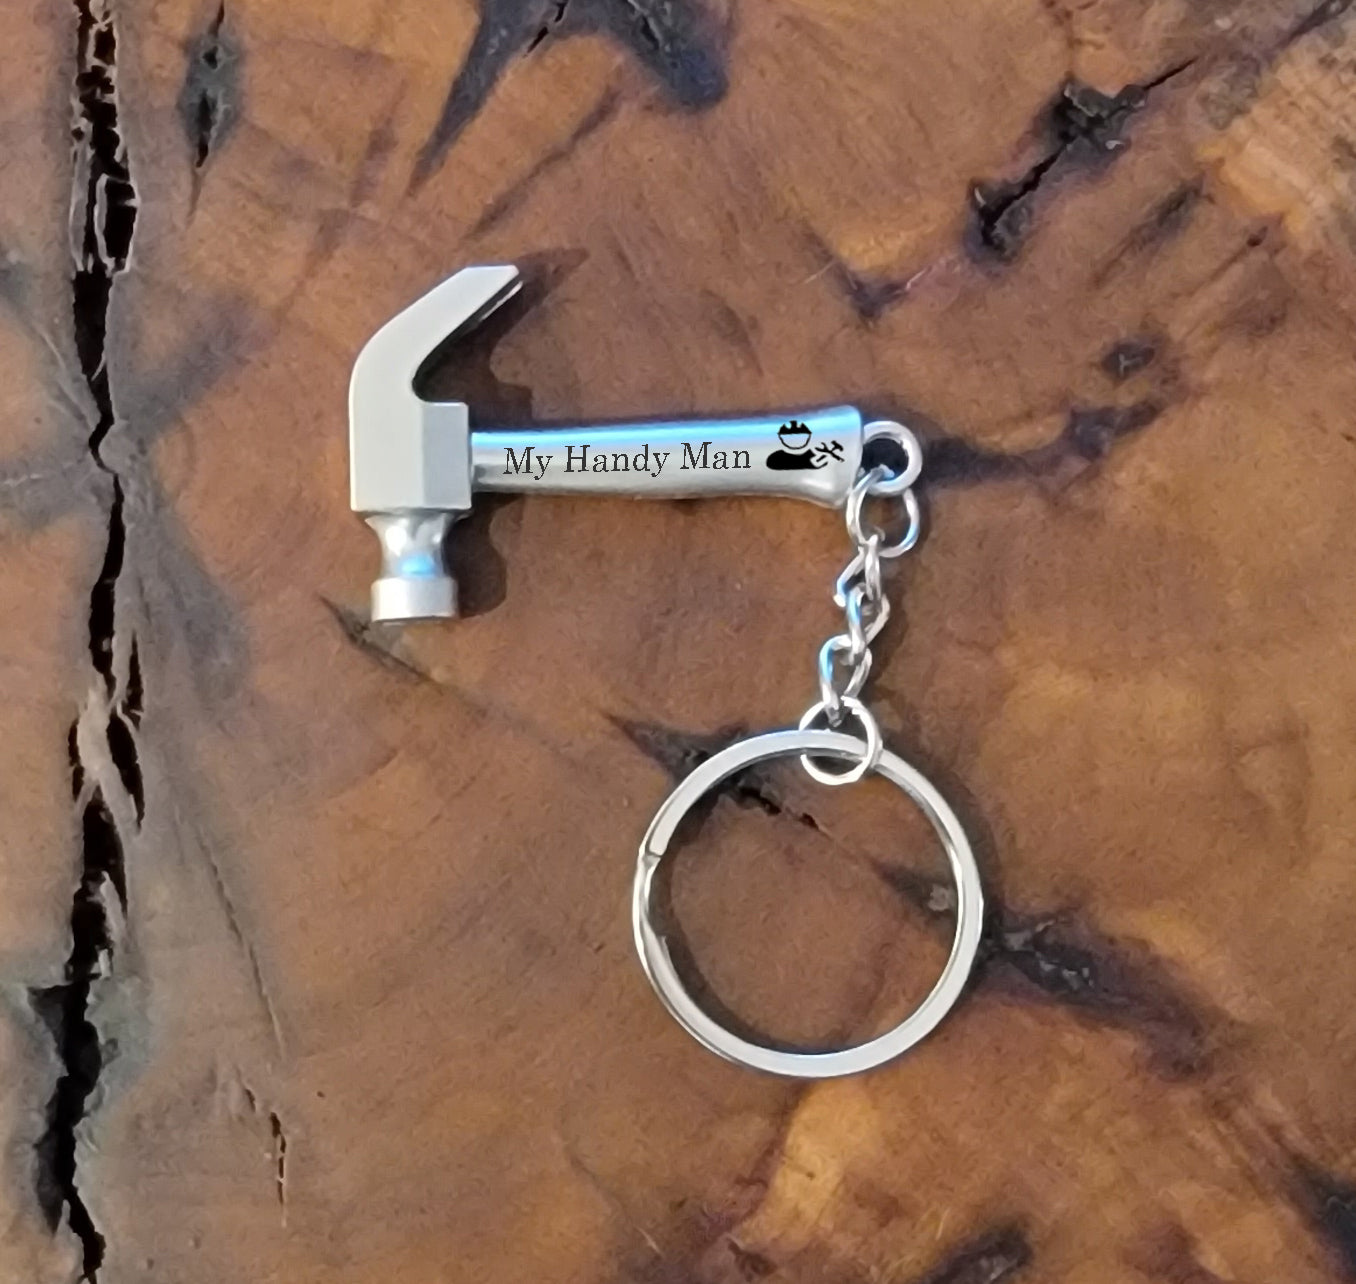 Think Engraved Custom Keychain Hammer Personalized Wrench, Hammer, or Crescent Wrench Keychain - Engraved Keychain